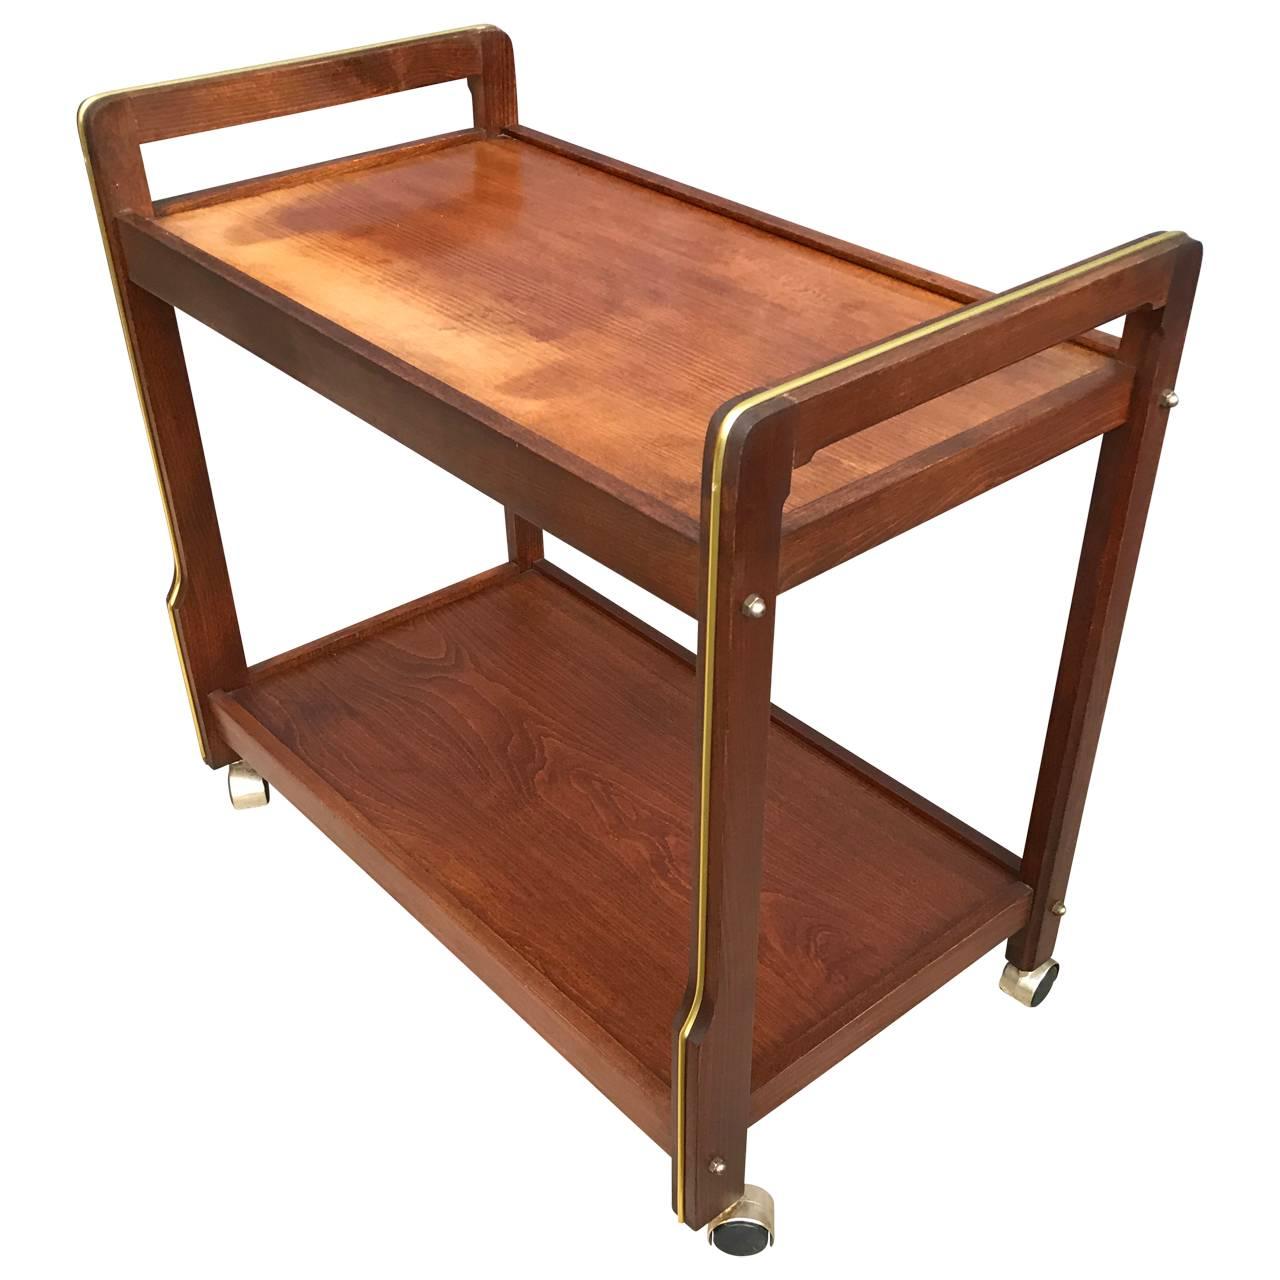 Mid-Century Danish bar cart with plastic covered brass decorations. Top tray has sun related discoloration which appears to be a charming addition to a Classic Mid-Century design.